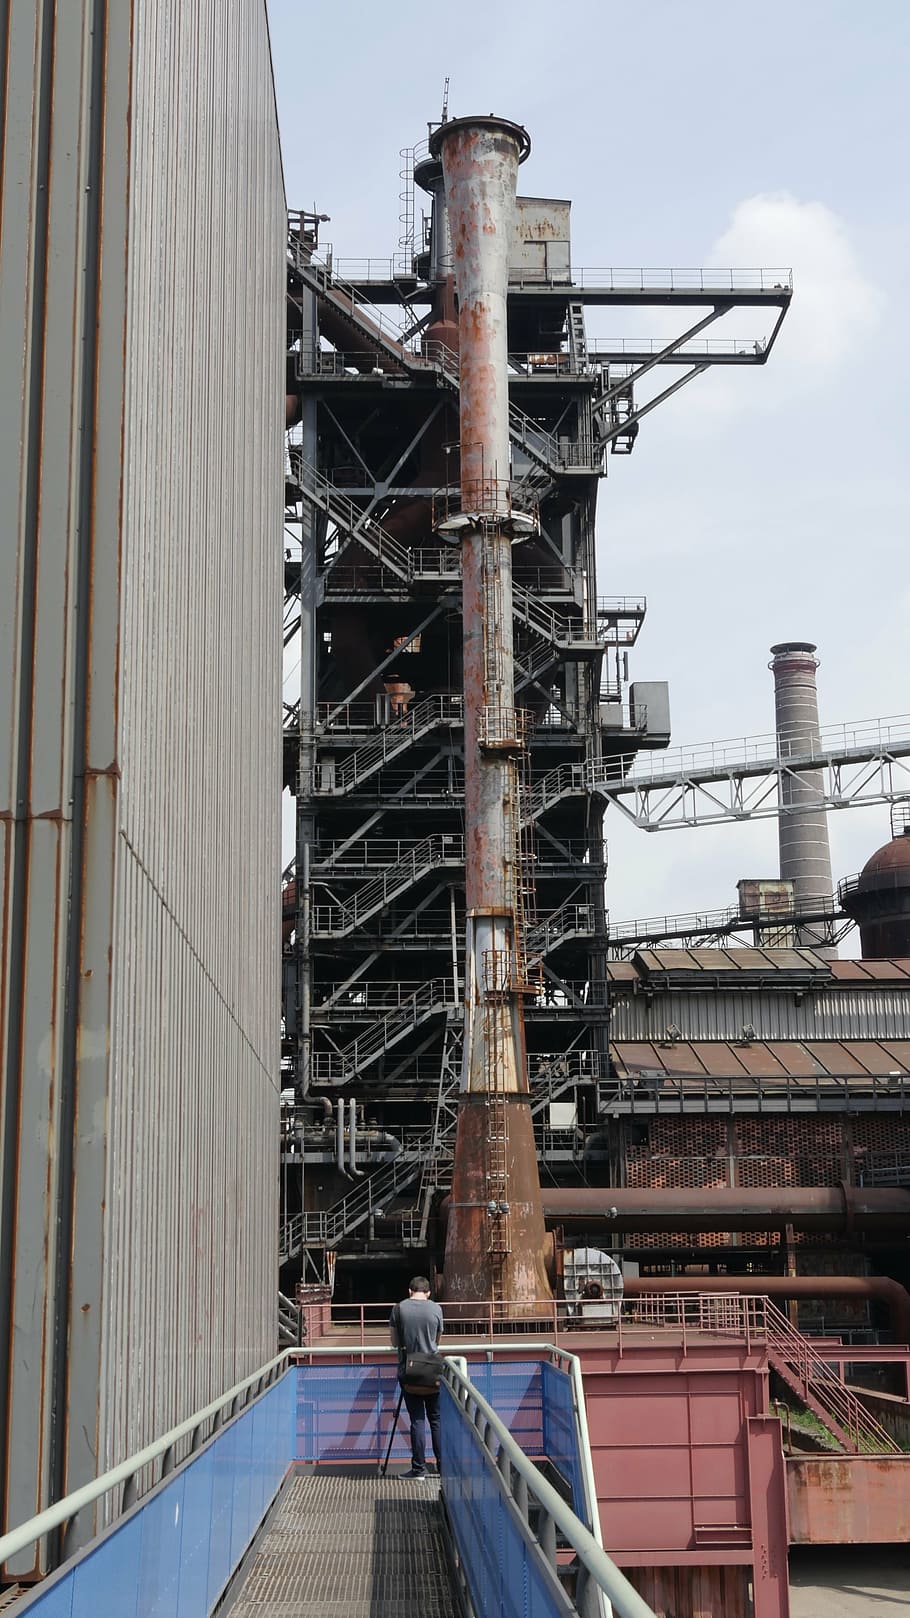 industry, old, old factory, chimney, ironworks, stainless, metallic, factory, architecture, built structure